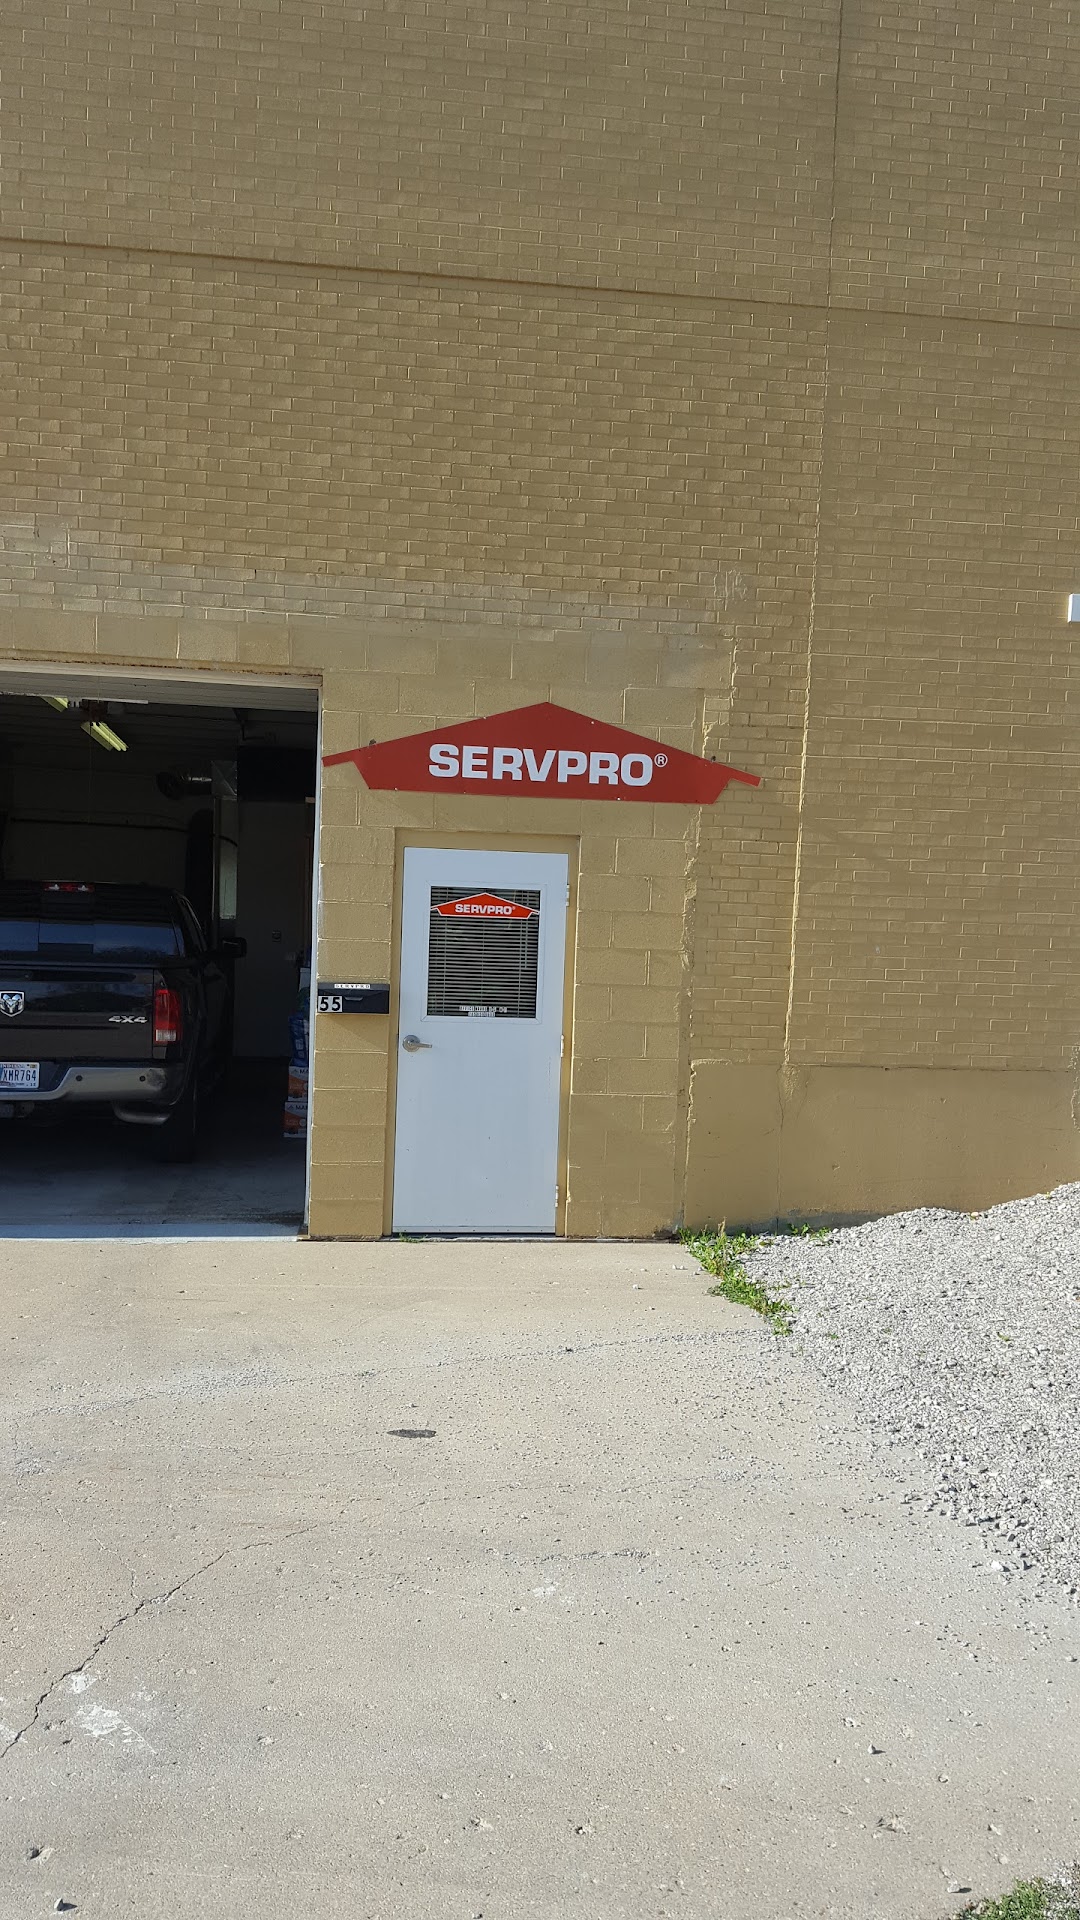 Servpro of Boone and Clinton Counties